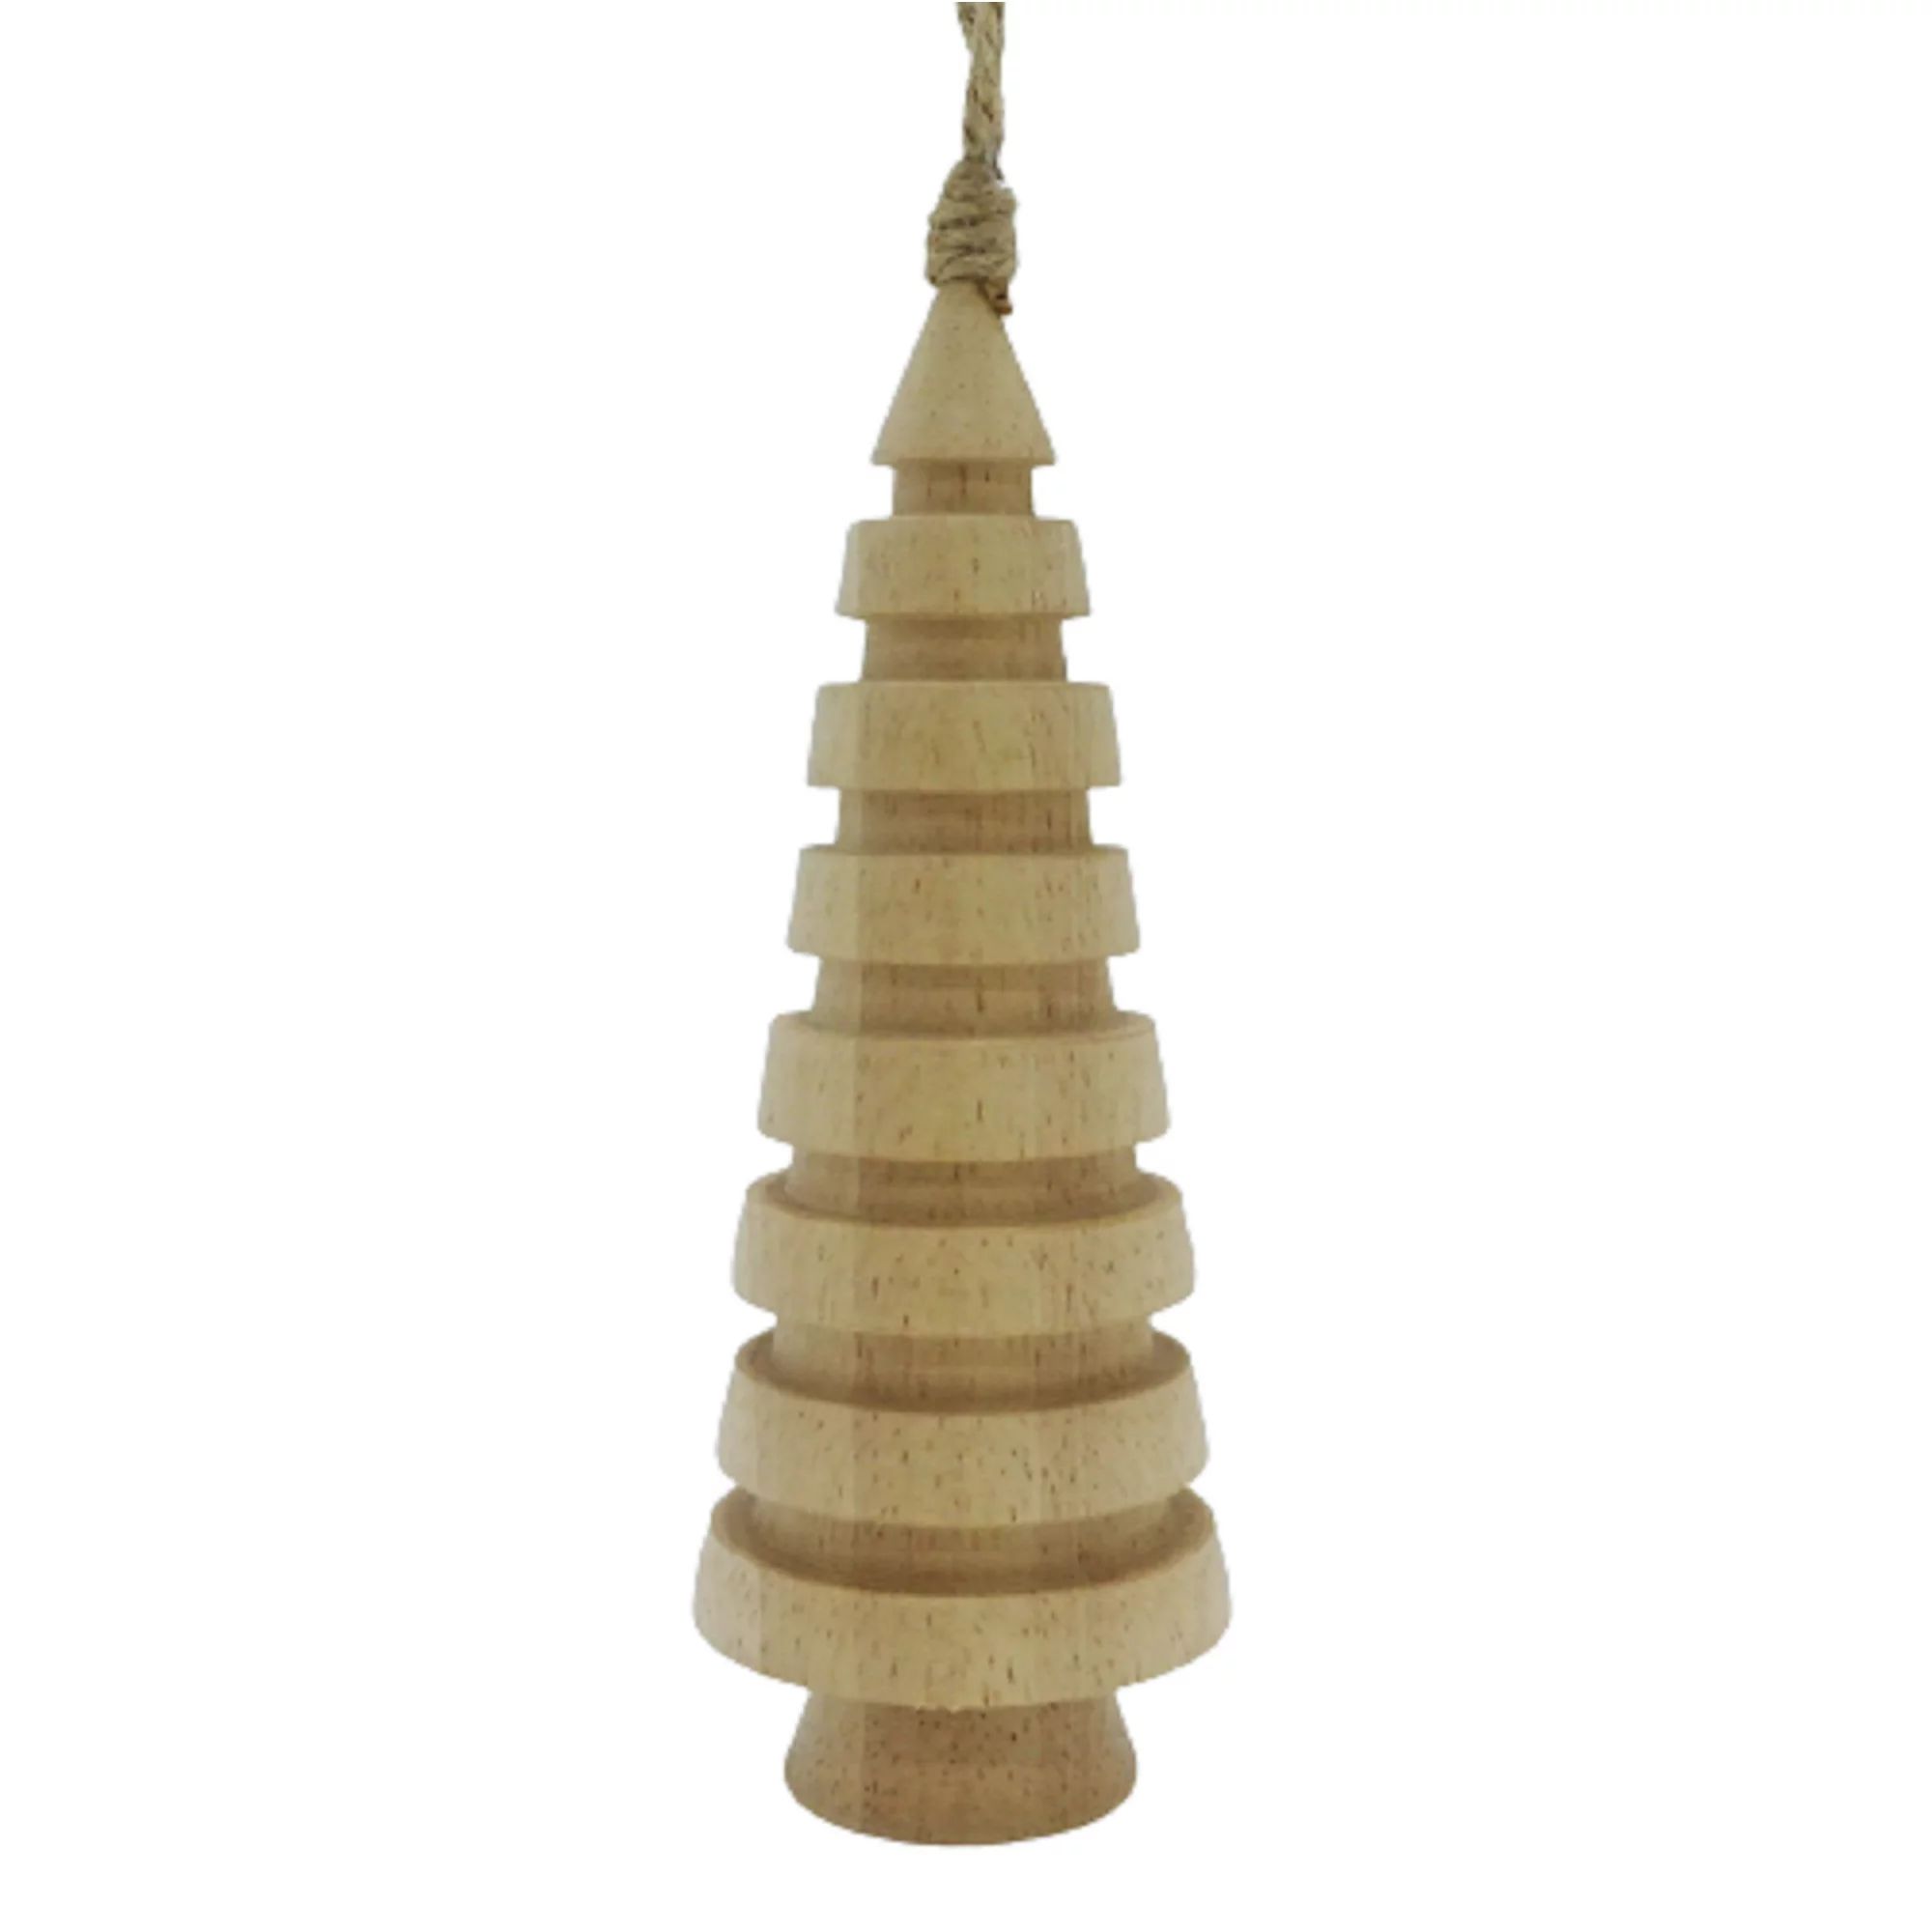 Jumbo Wood Tree Ornament, Festive Fireside Theme, Natural Wood Color, 0.11 kg, by Holiday Time | Walmart (US)